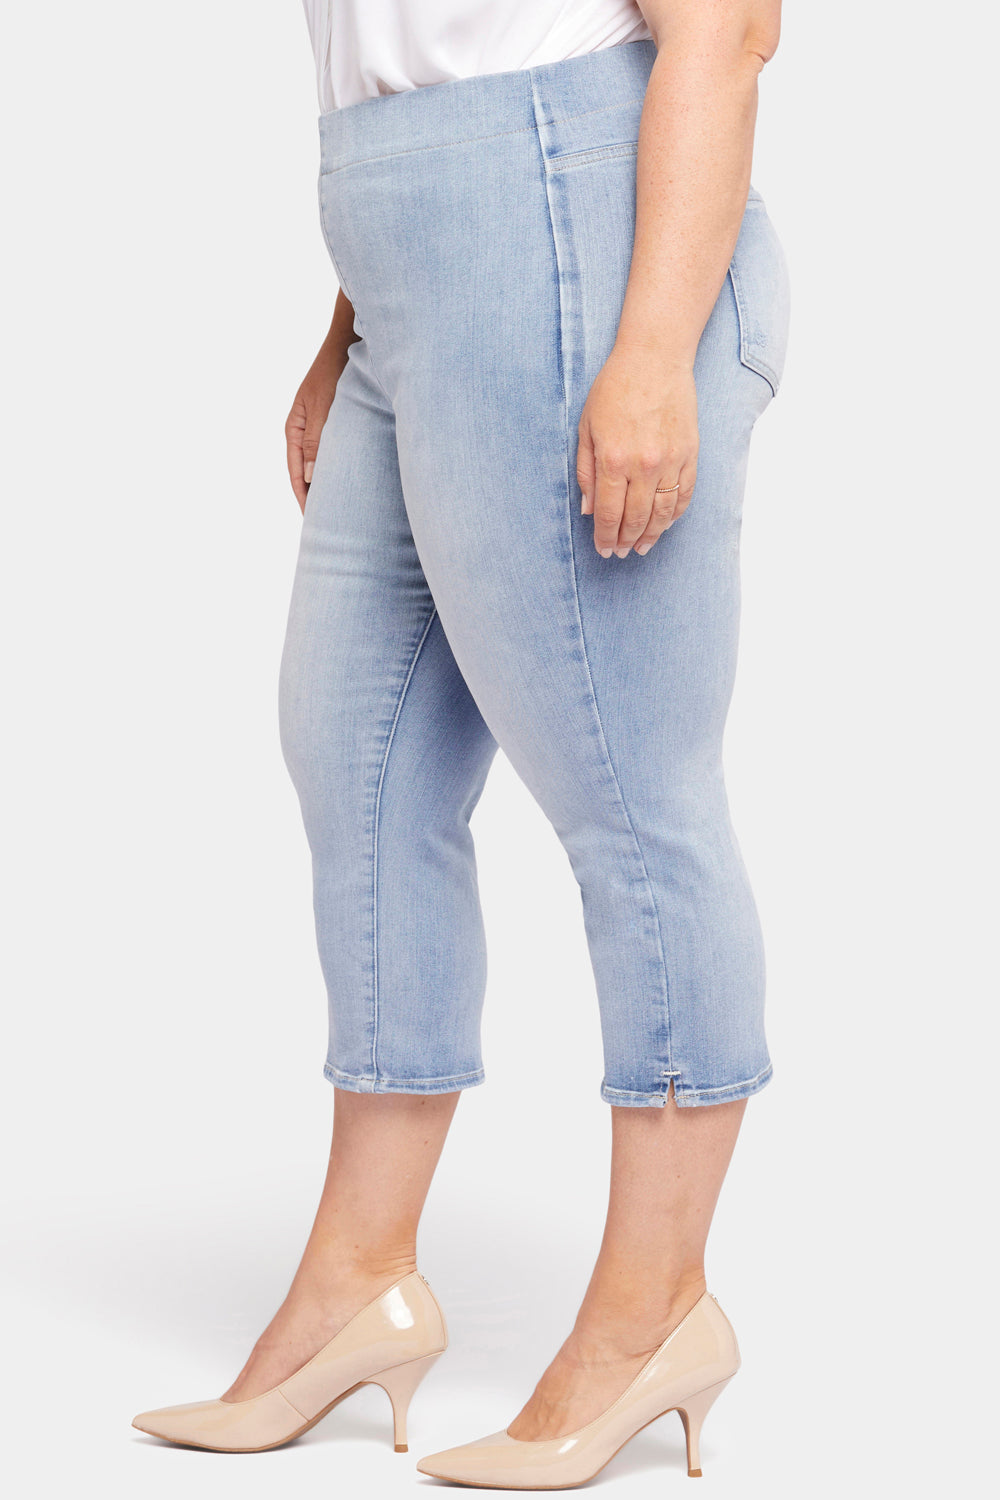 NYDJ Dakota Crop Pull-On Jeans In Plus Size In SpanSpring™ Denim With Side Slits - Charmed